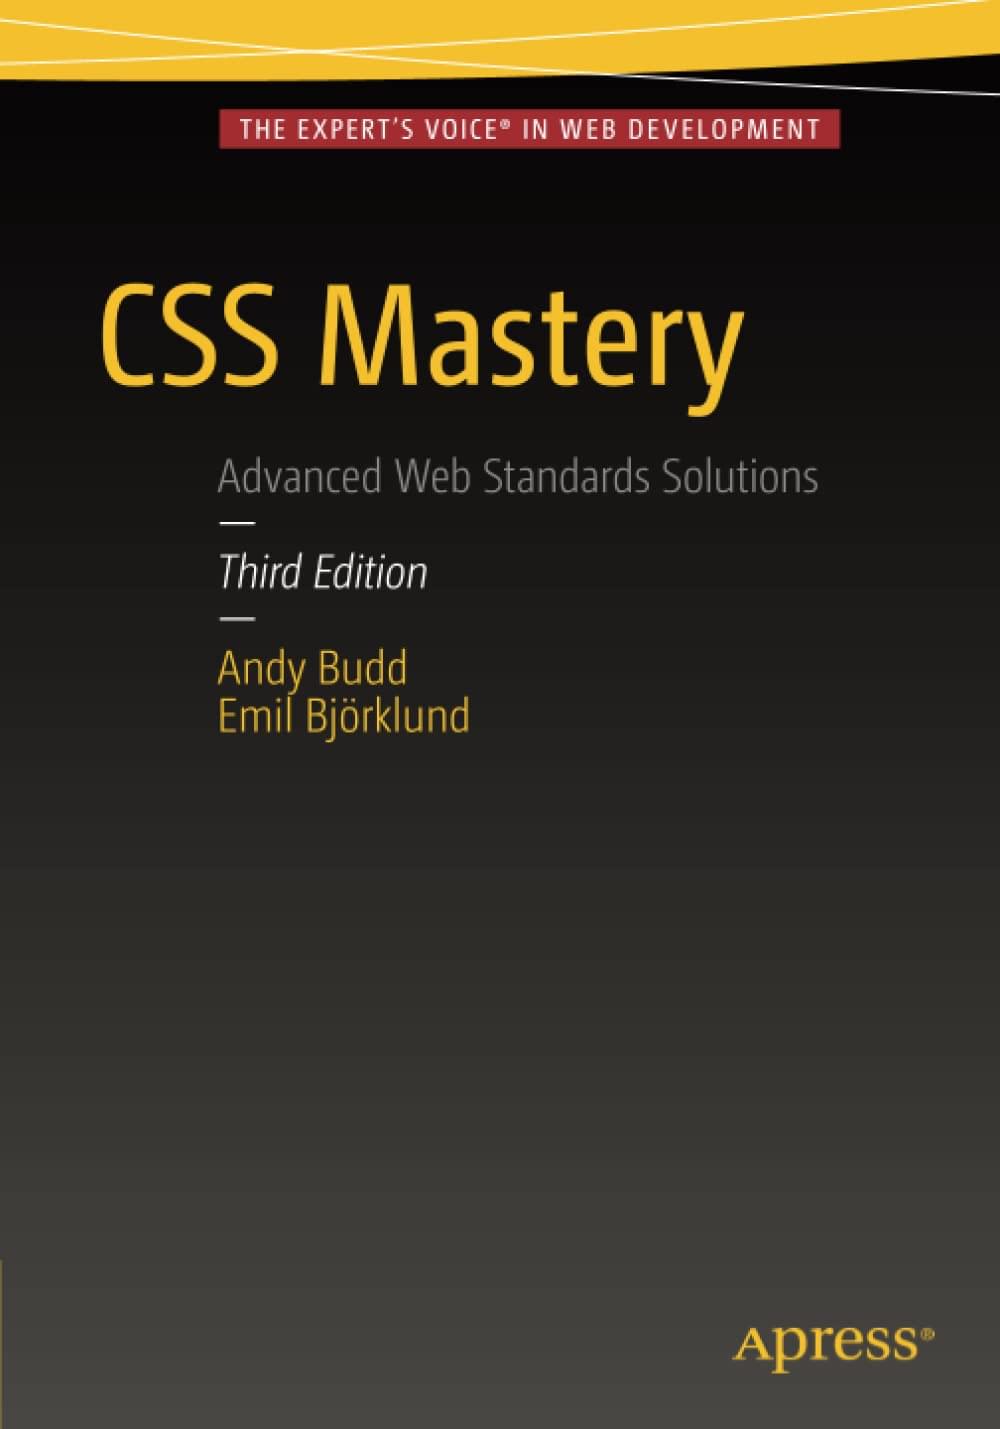 CSS Mastery - cover image